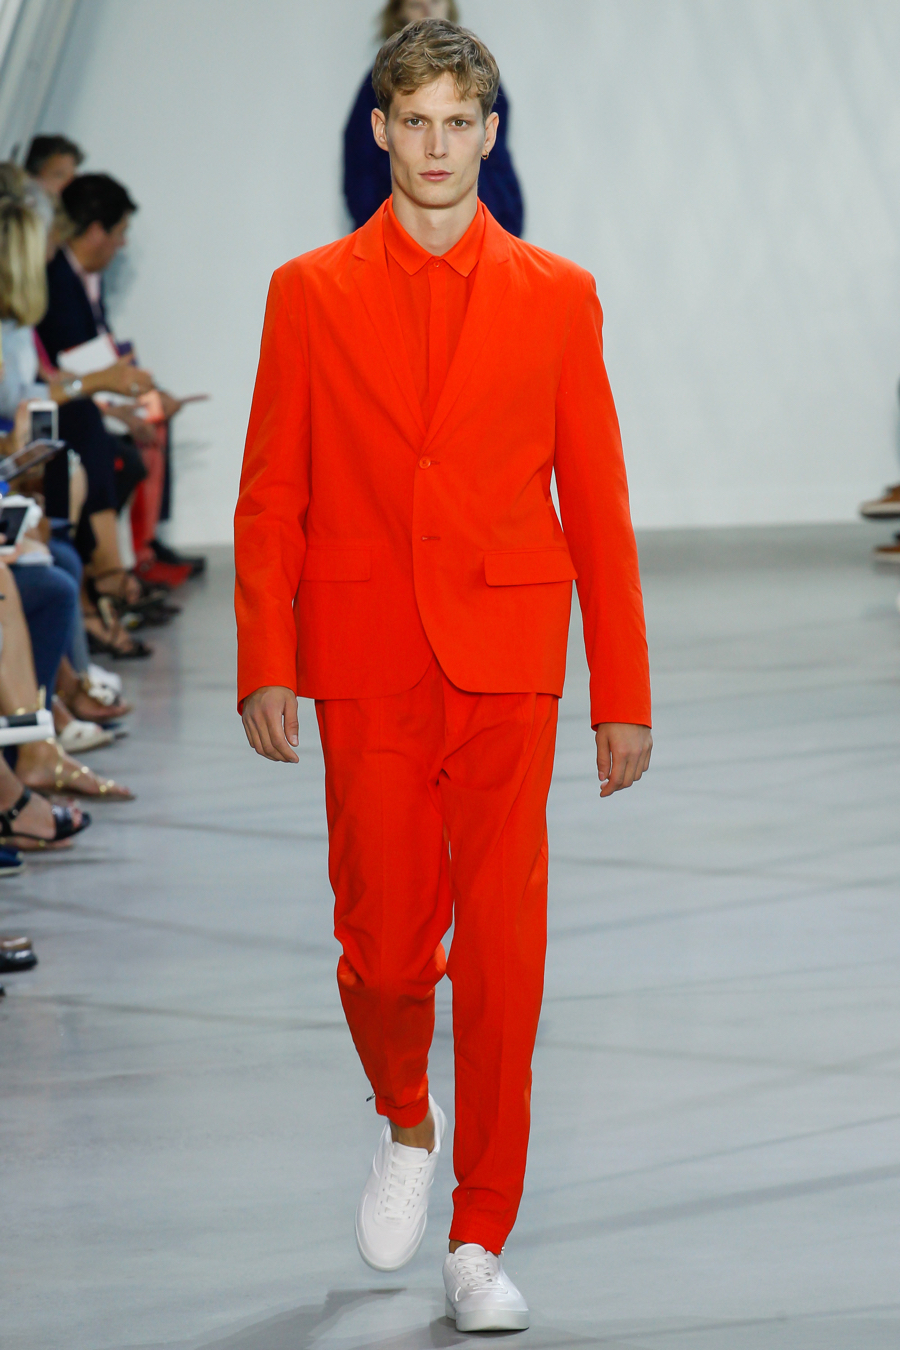 Lacoste Spring Summer 2016 Menswear Collection New York Fashion Week 013